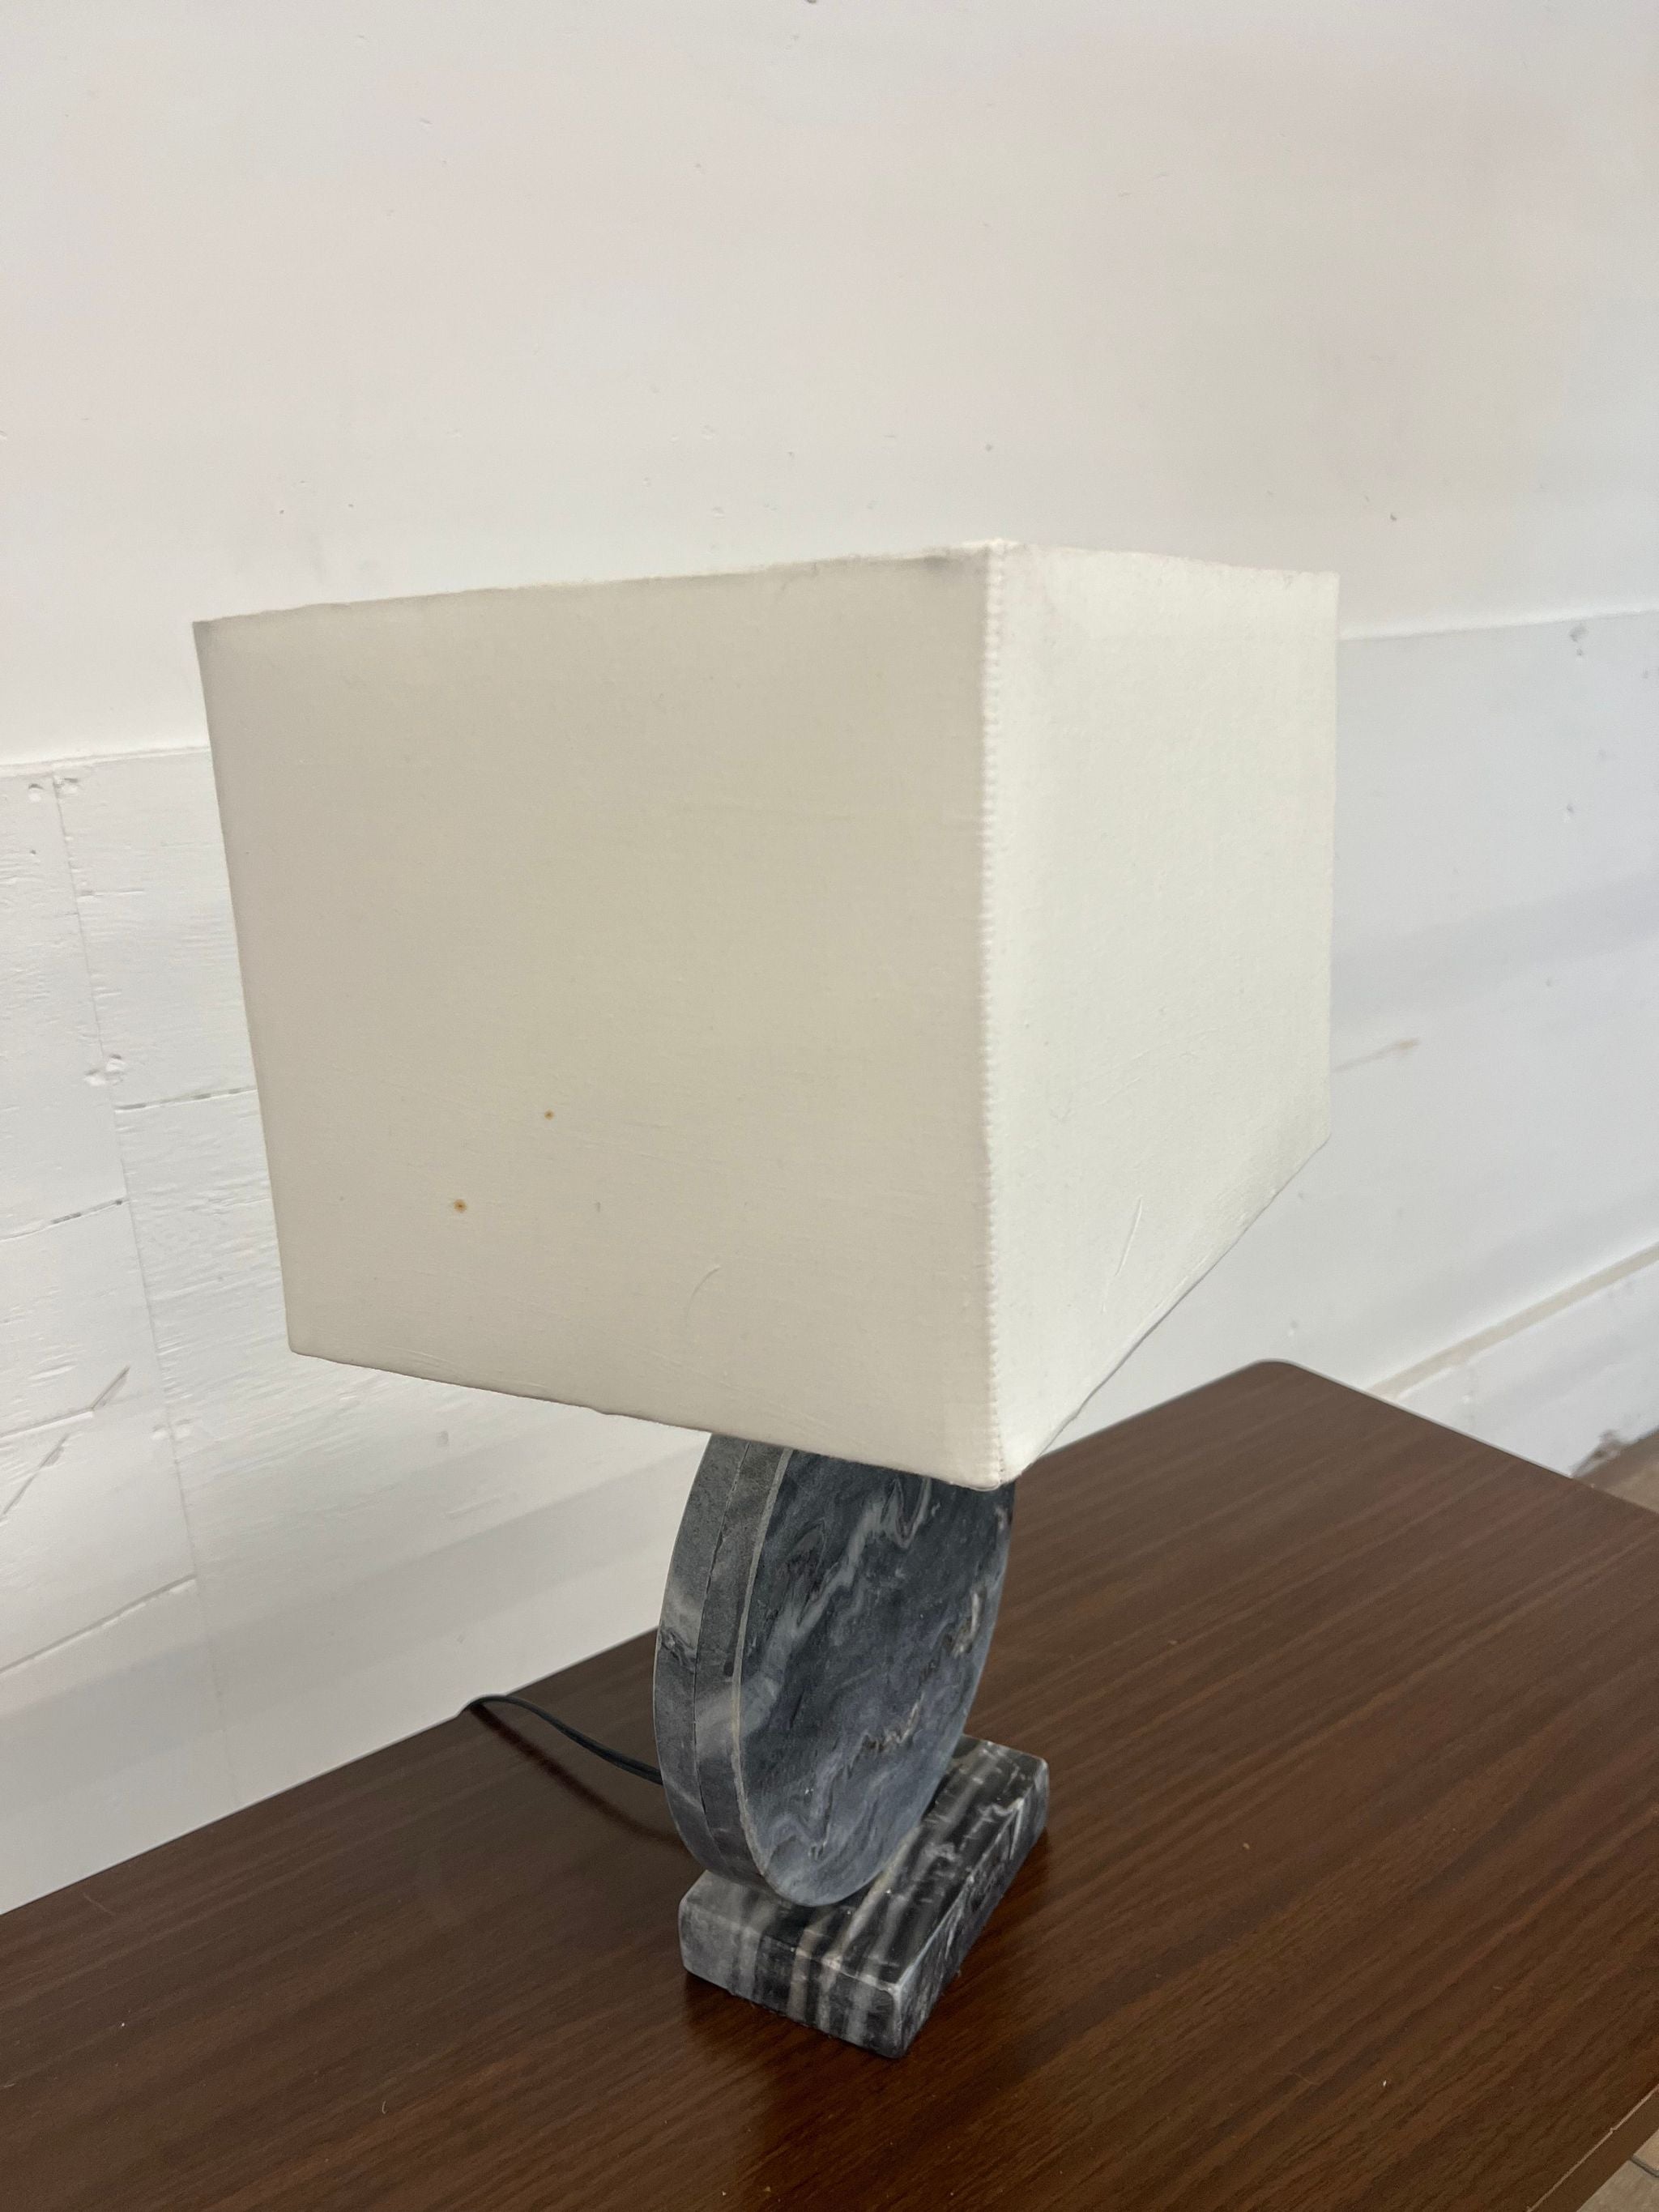 Reperch brand table lamp with a white square shade and a dark, polished marble base on a wooden surface.